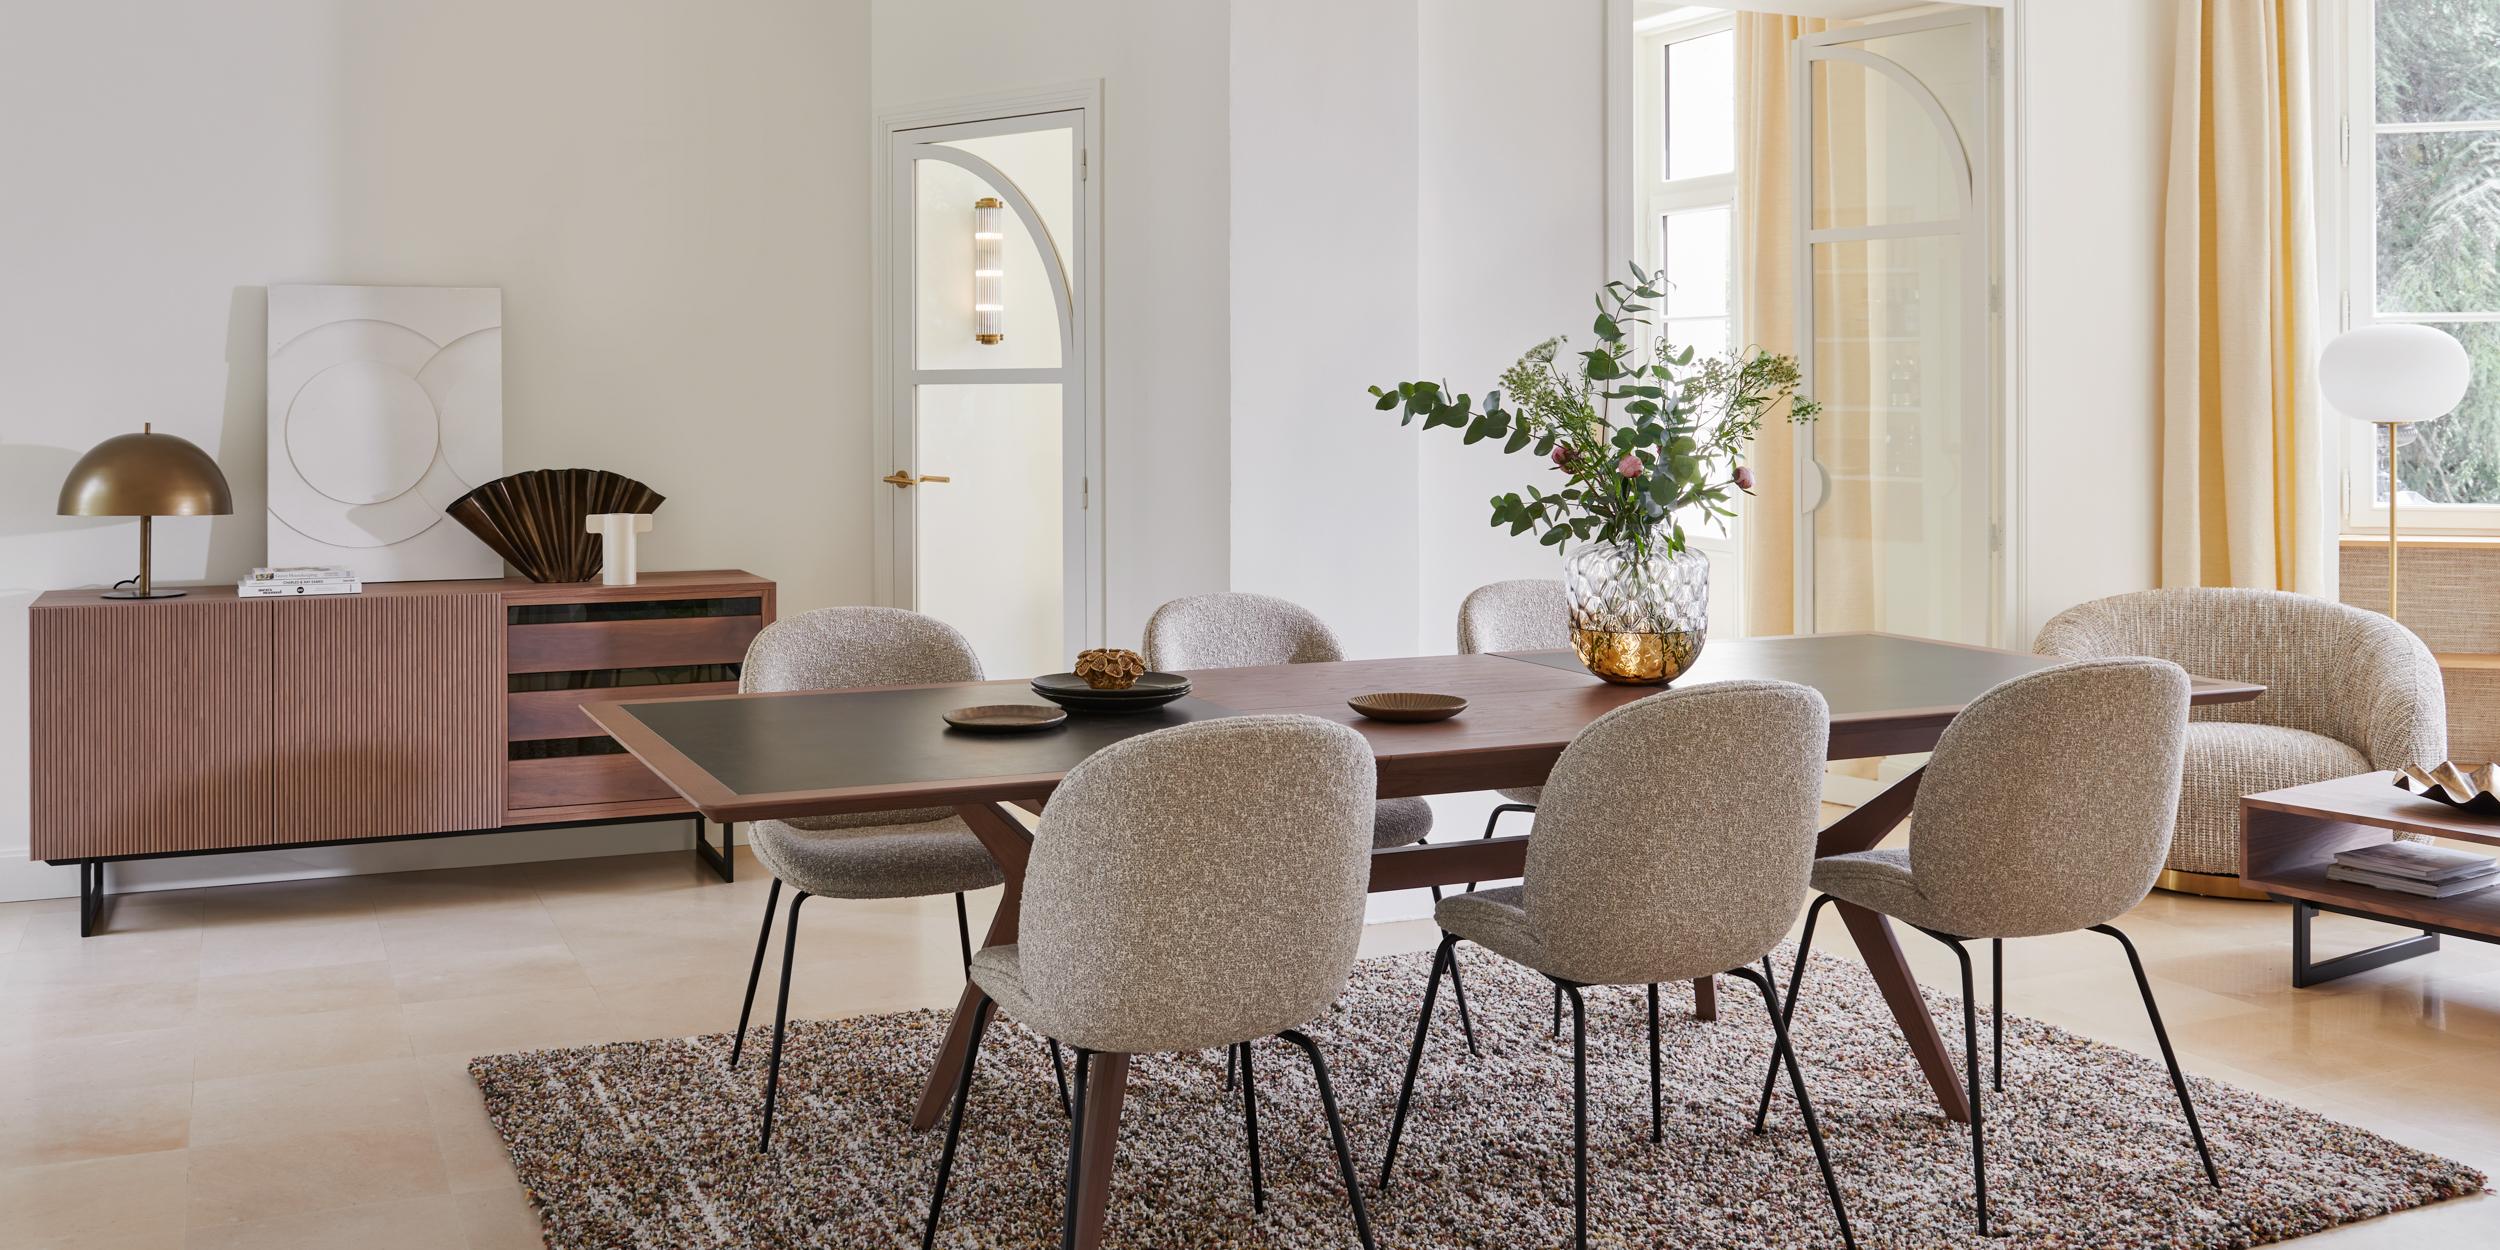 This dining table belongs to our brand new collection CANNES and is designed by Christophe Lecomte, a French designer located on the French Atlantic shore. 
Christophe graduated from the notorious BOULLE school in 1990 and began his career in